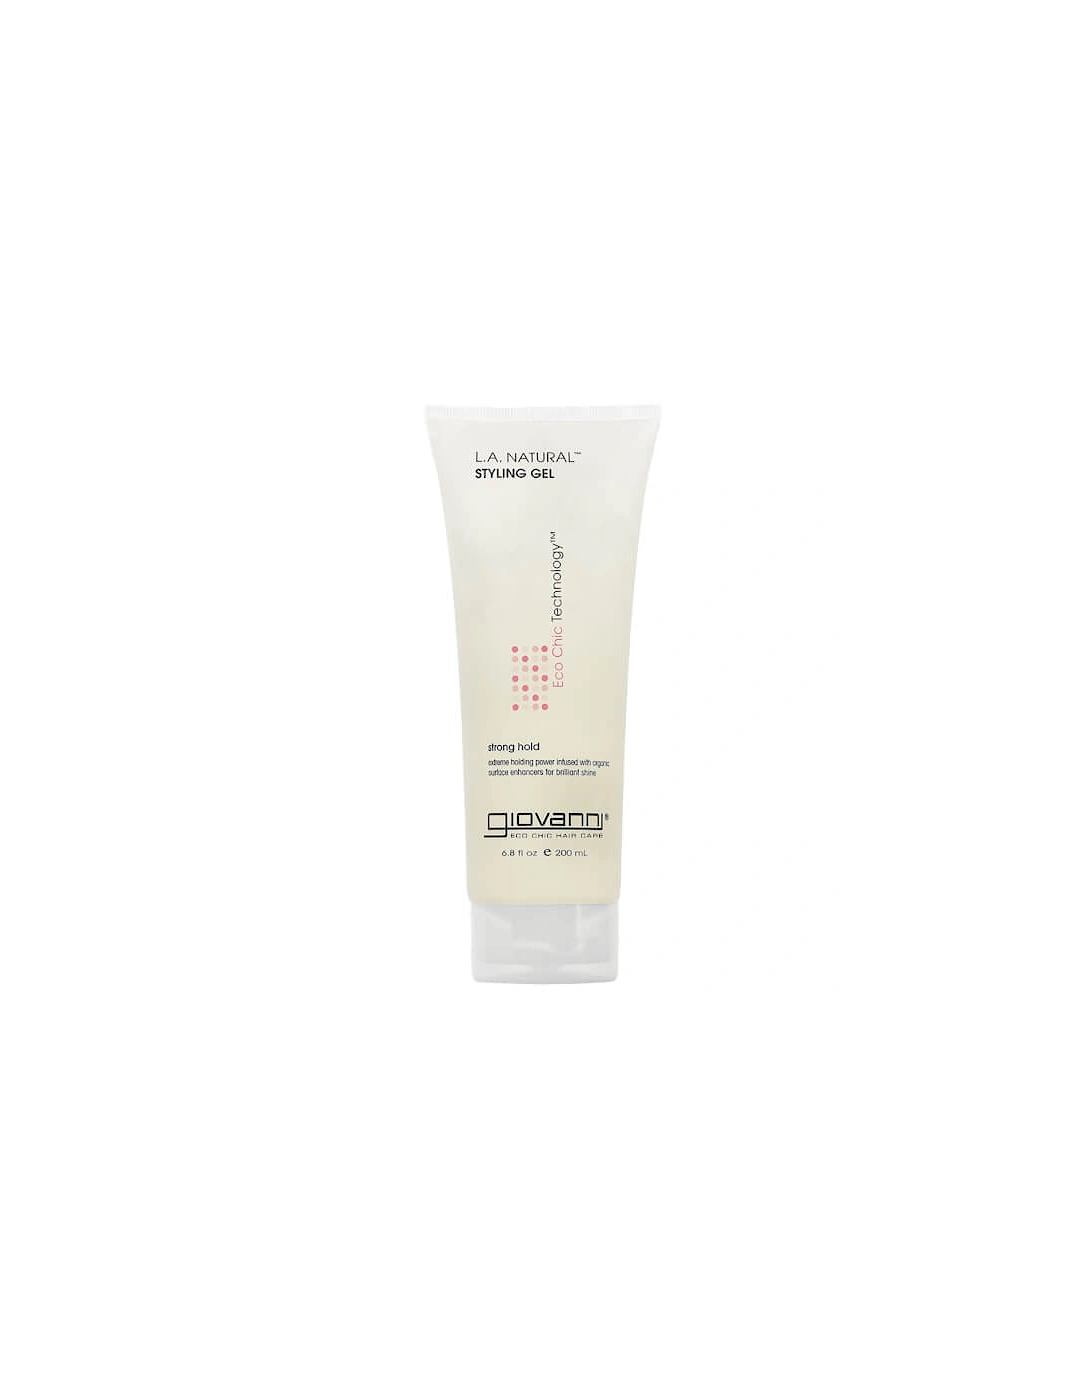 L.A. Natural Styling Gel 60ml - Giovanni, 2 of 1